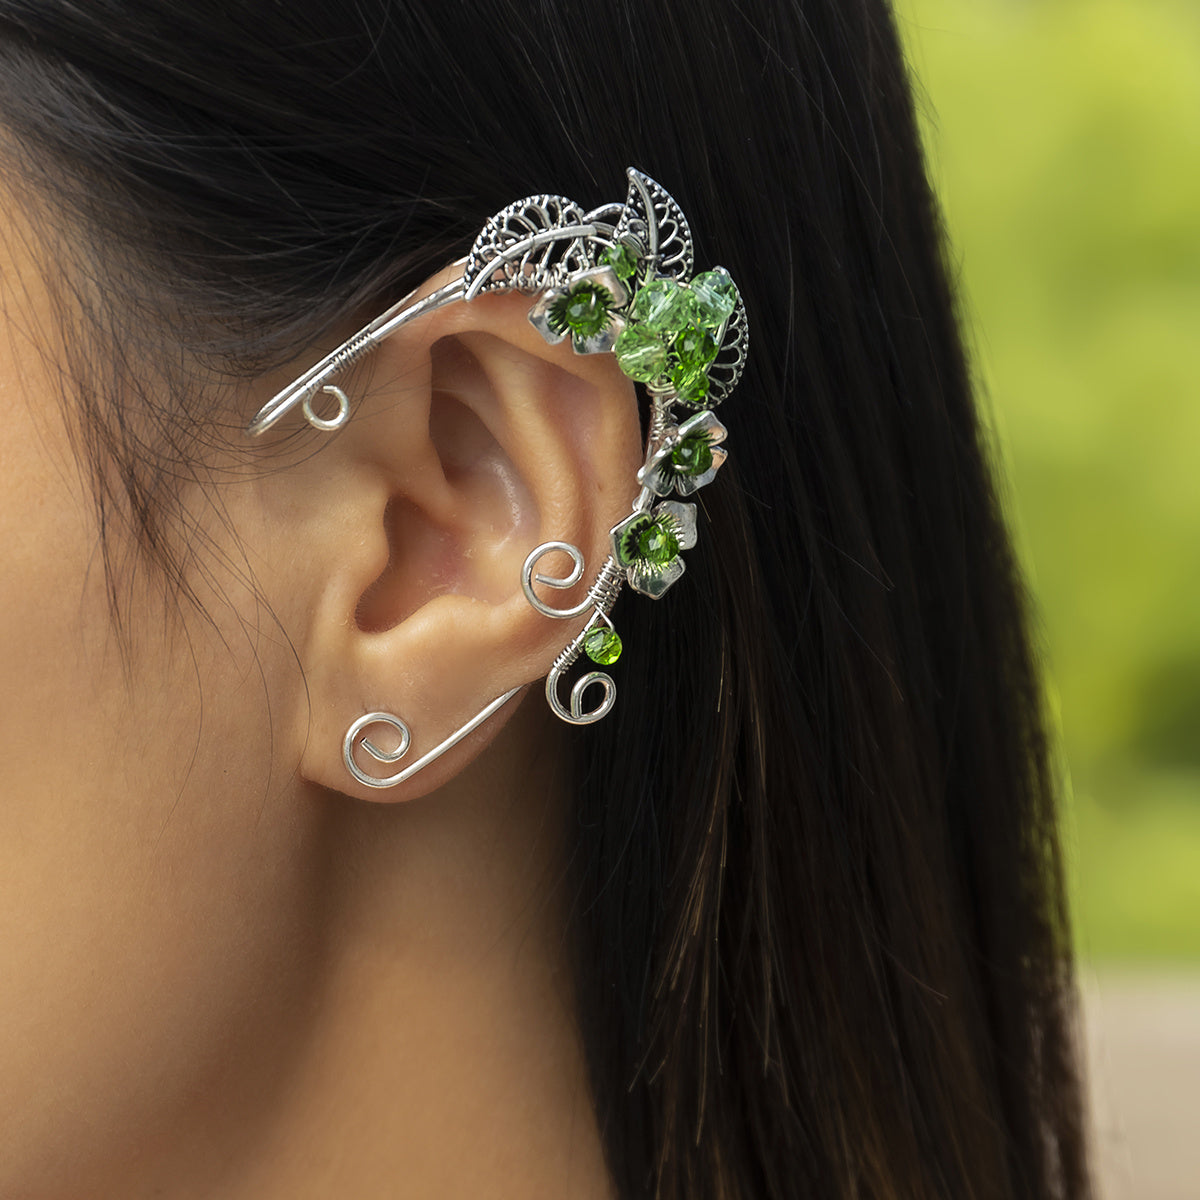 Delicate Vintage Flower Ear Cuff Earrings - A Perfect Gift for the Special Woman in Your Life